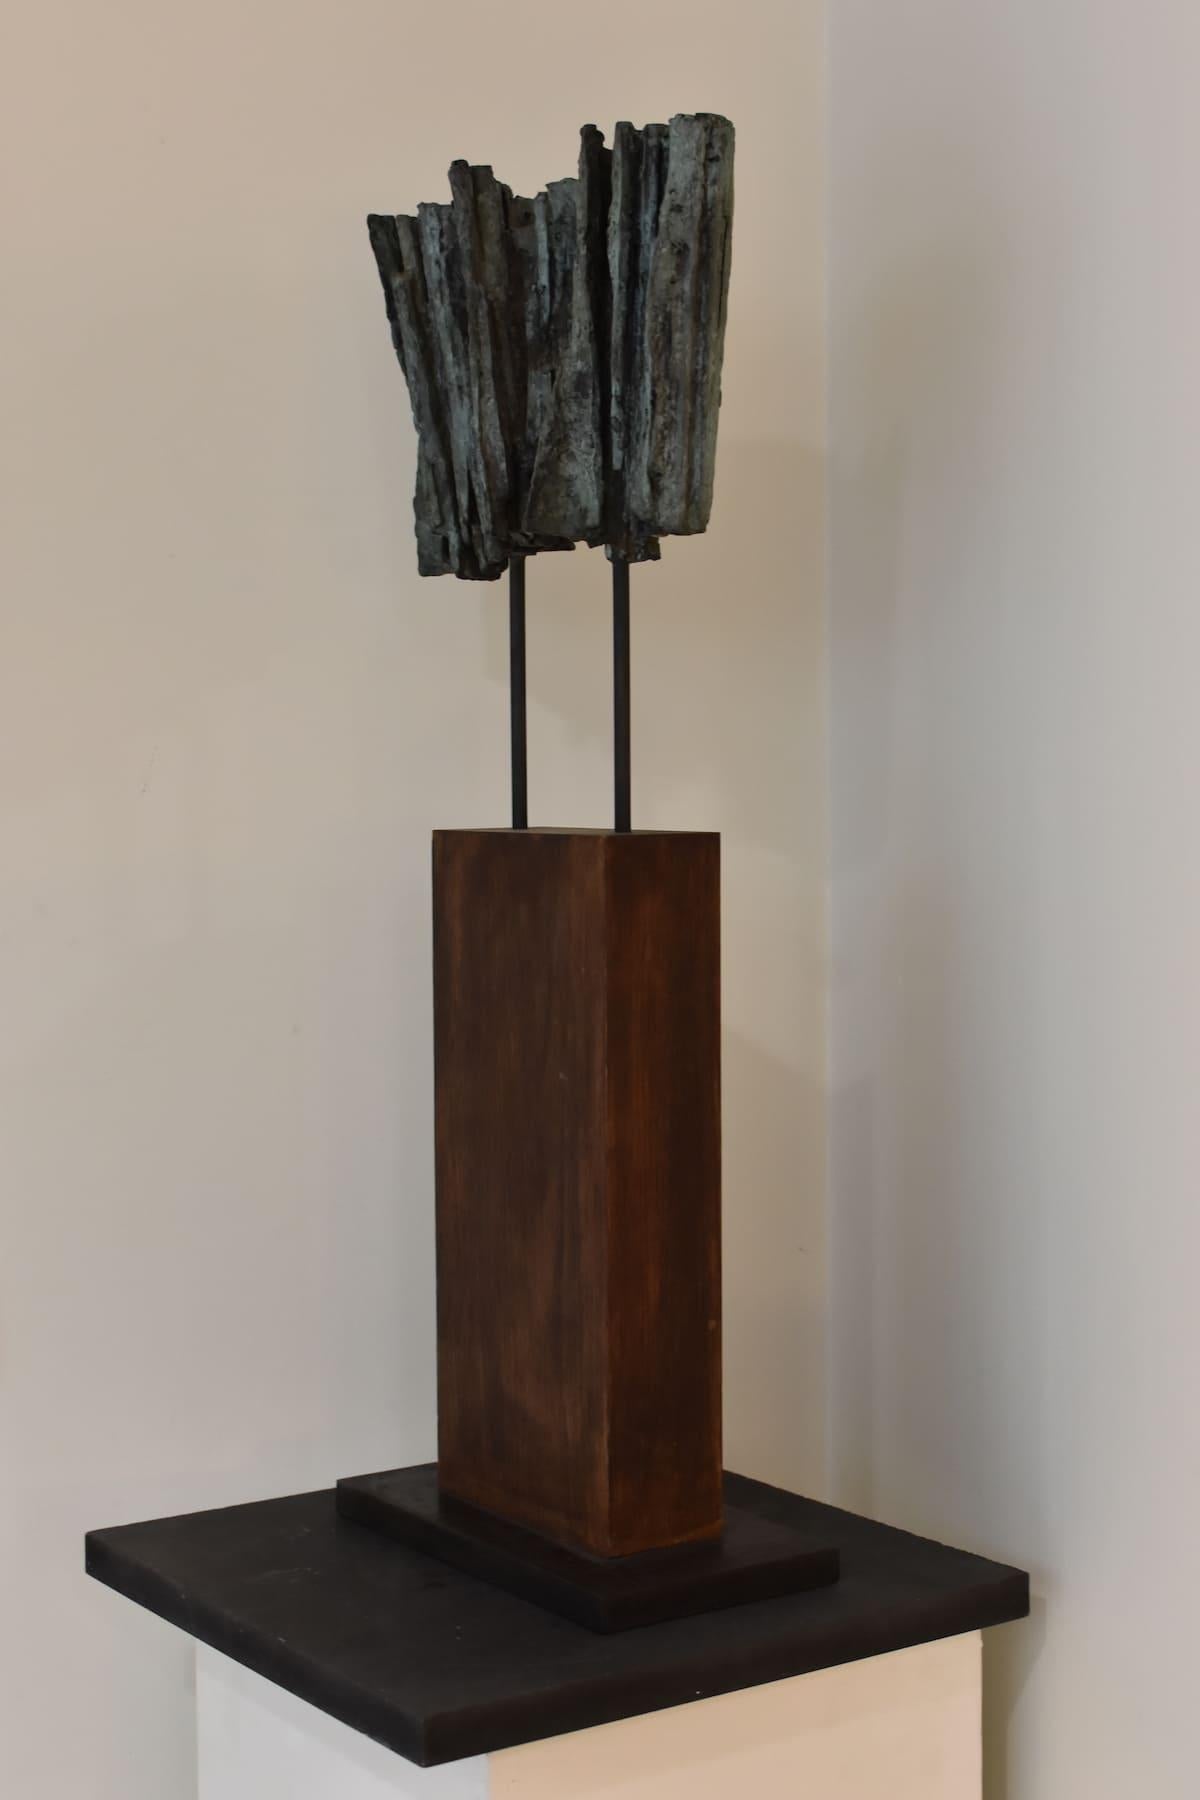 Vibration n°2 by Martine Demal - Contemporary bronze sculpture, abstract For Sale 2